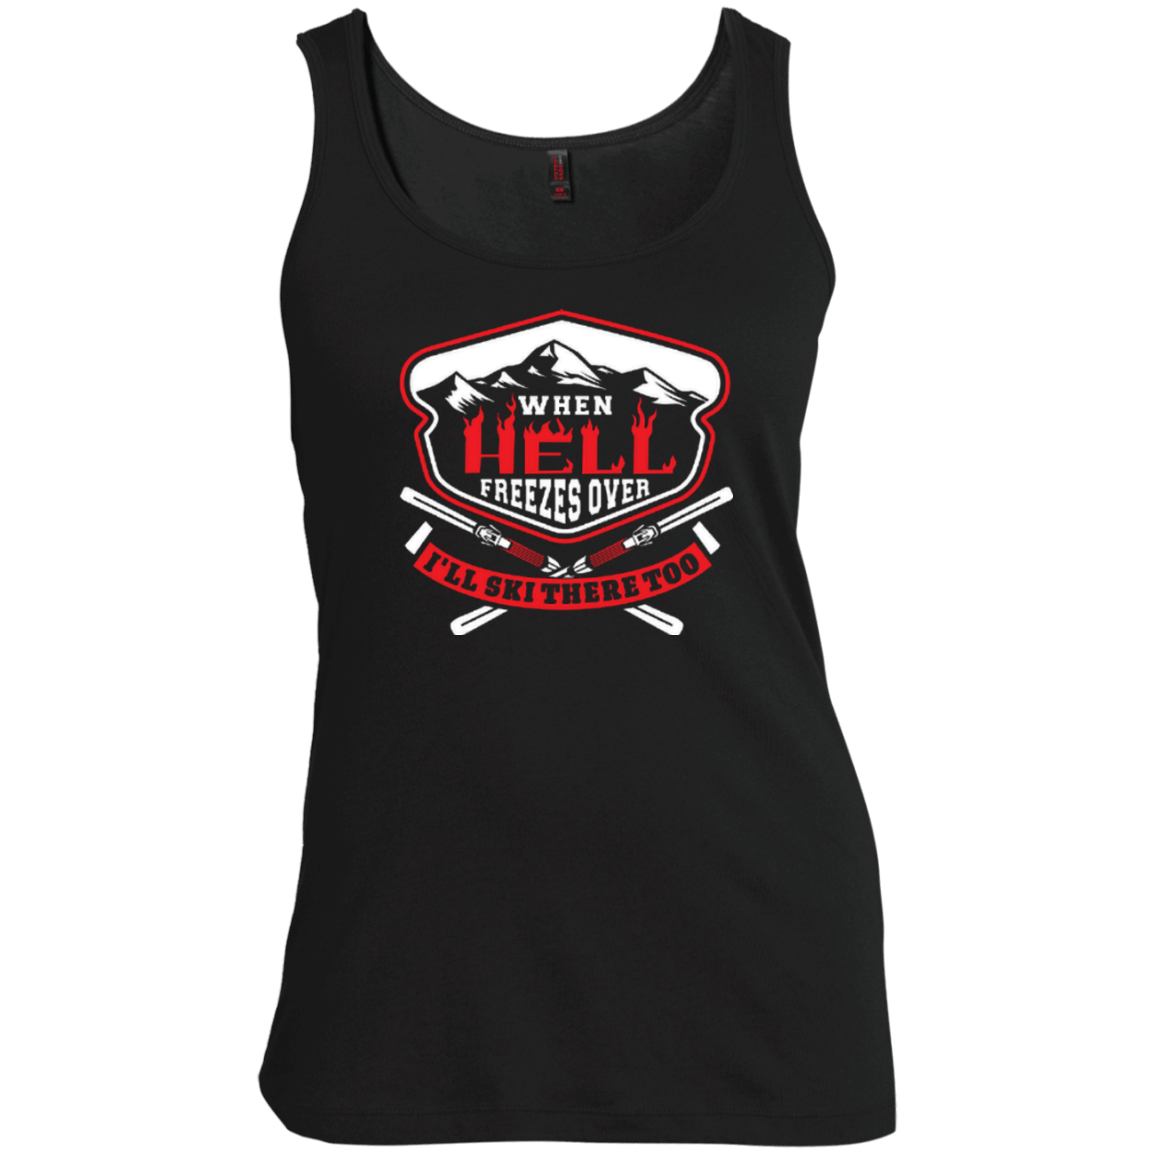 When Hell Freezes Over I'll Ski There Too Tank Tops - Powderaddicts